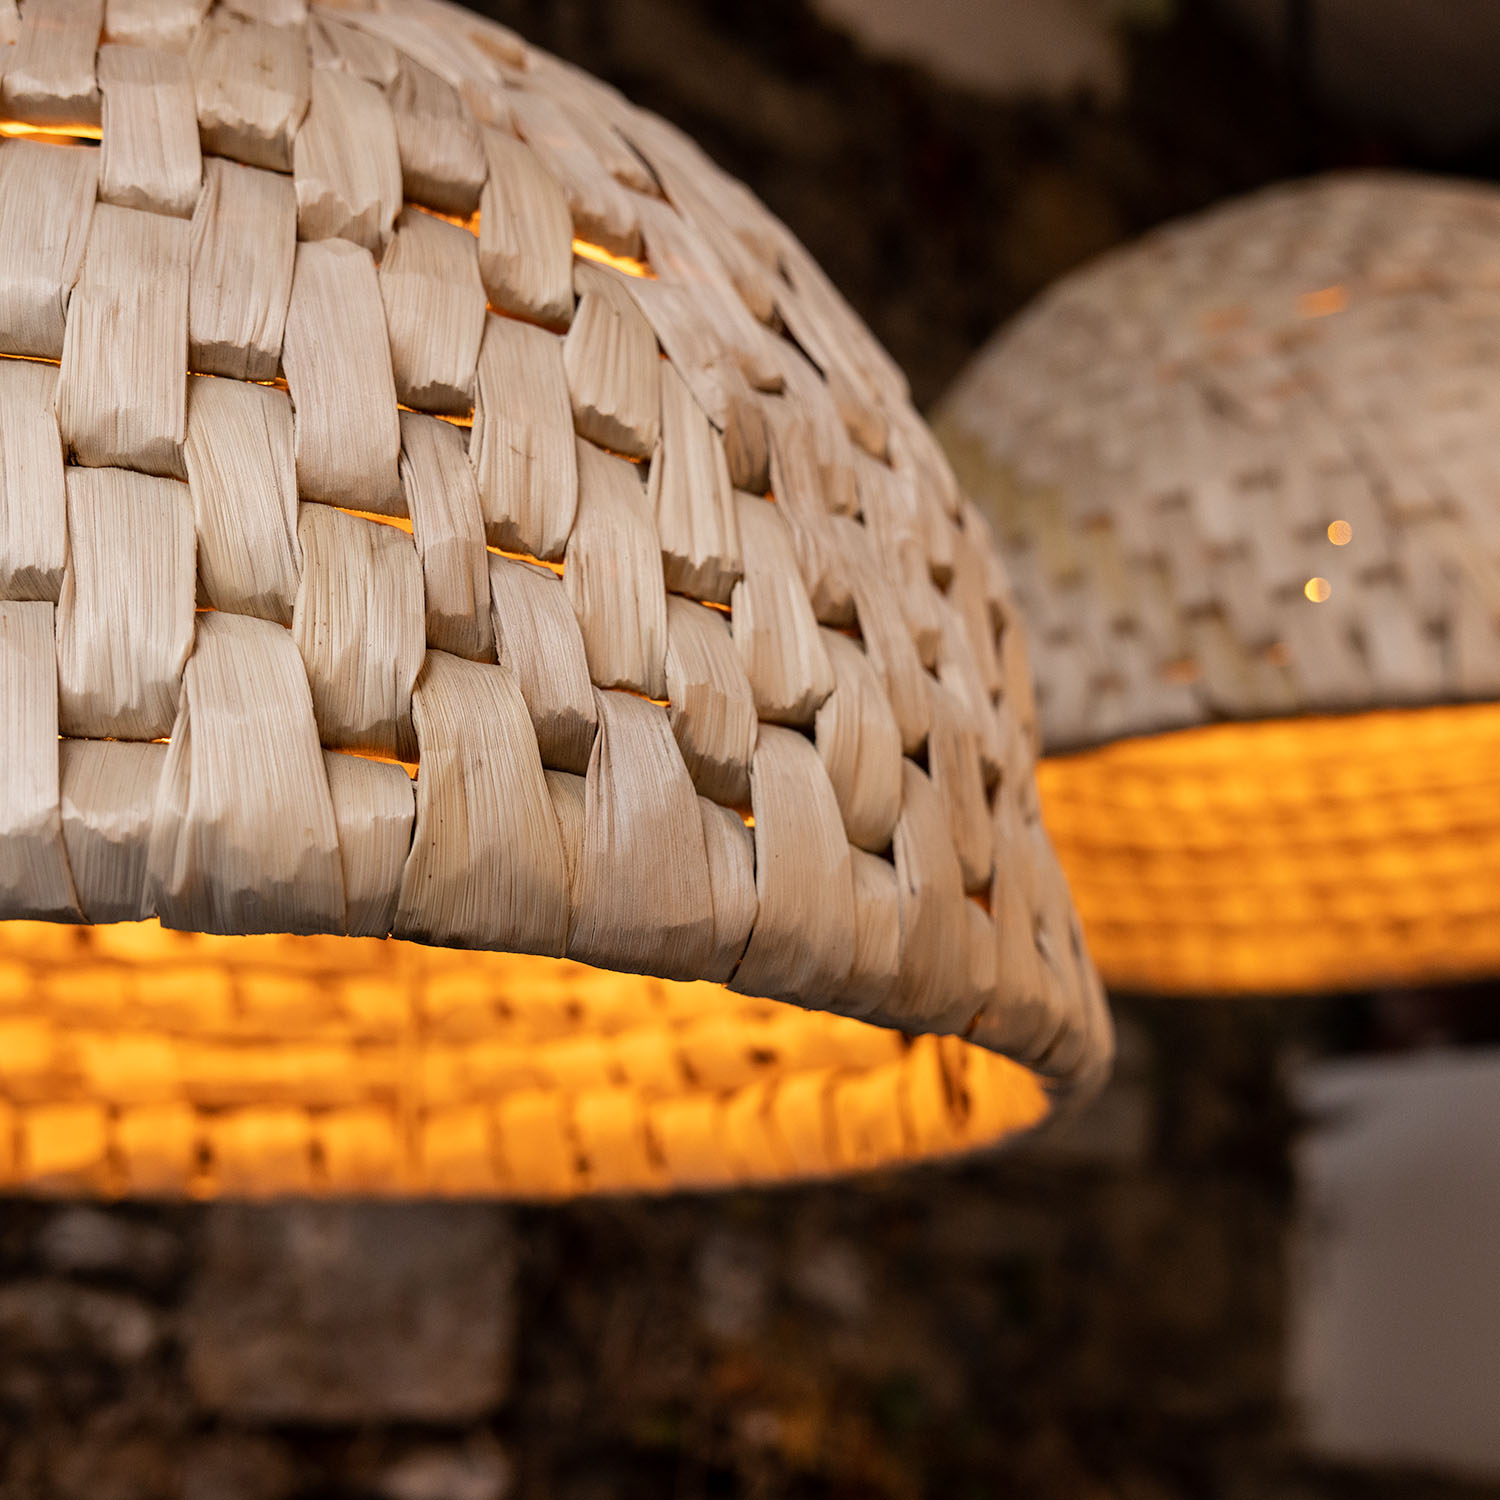 The Betty lights with rattan shades